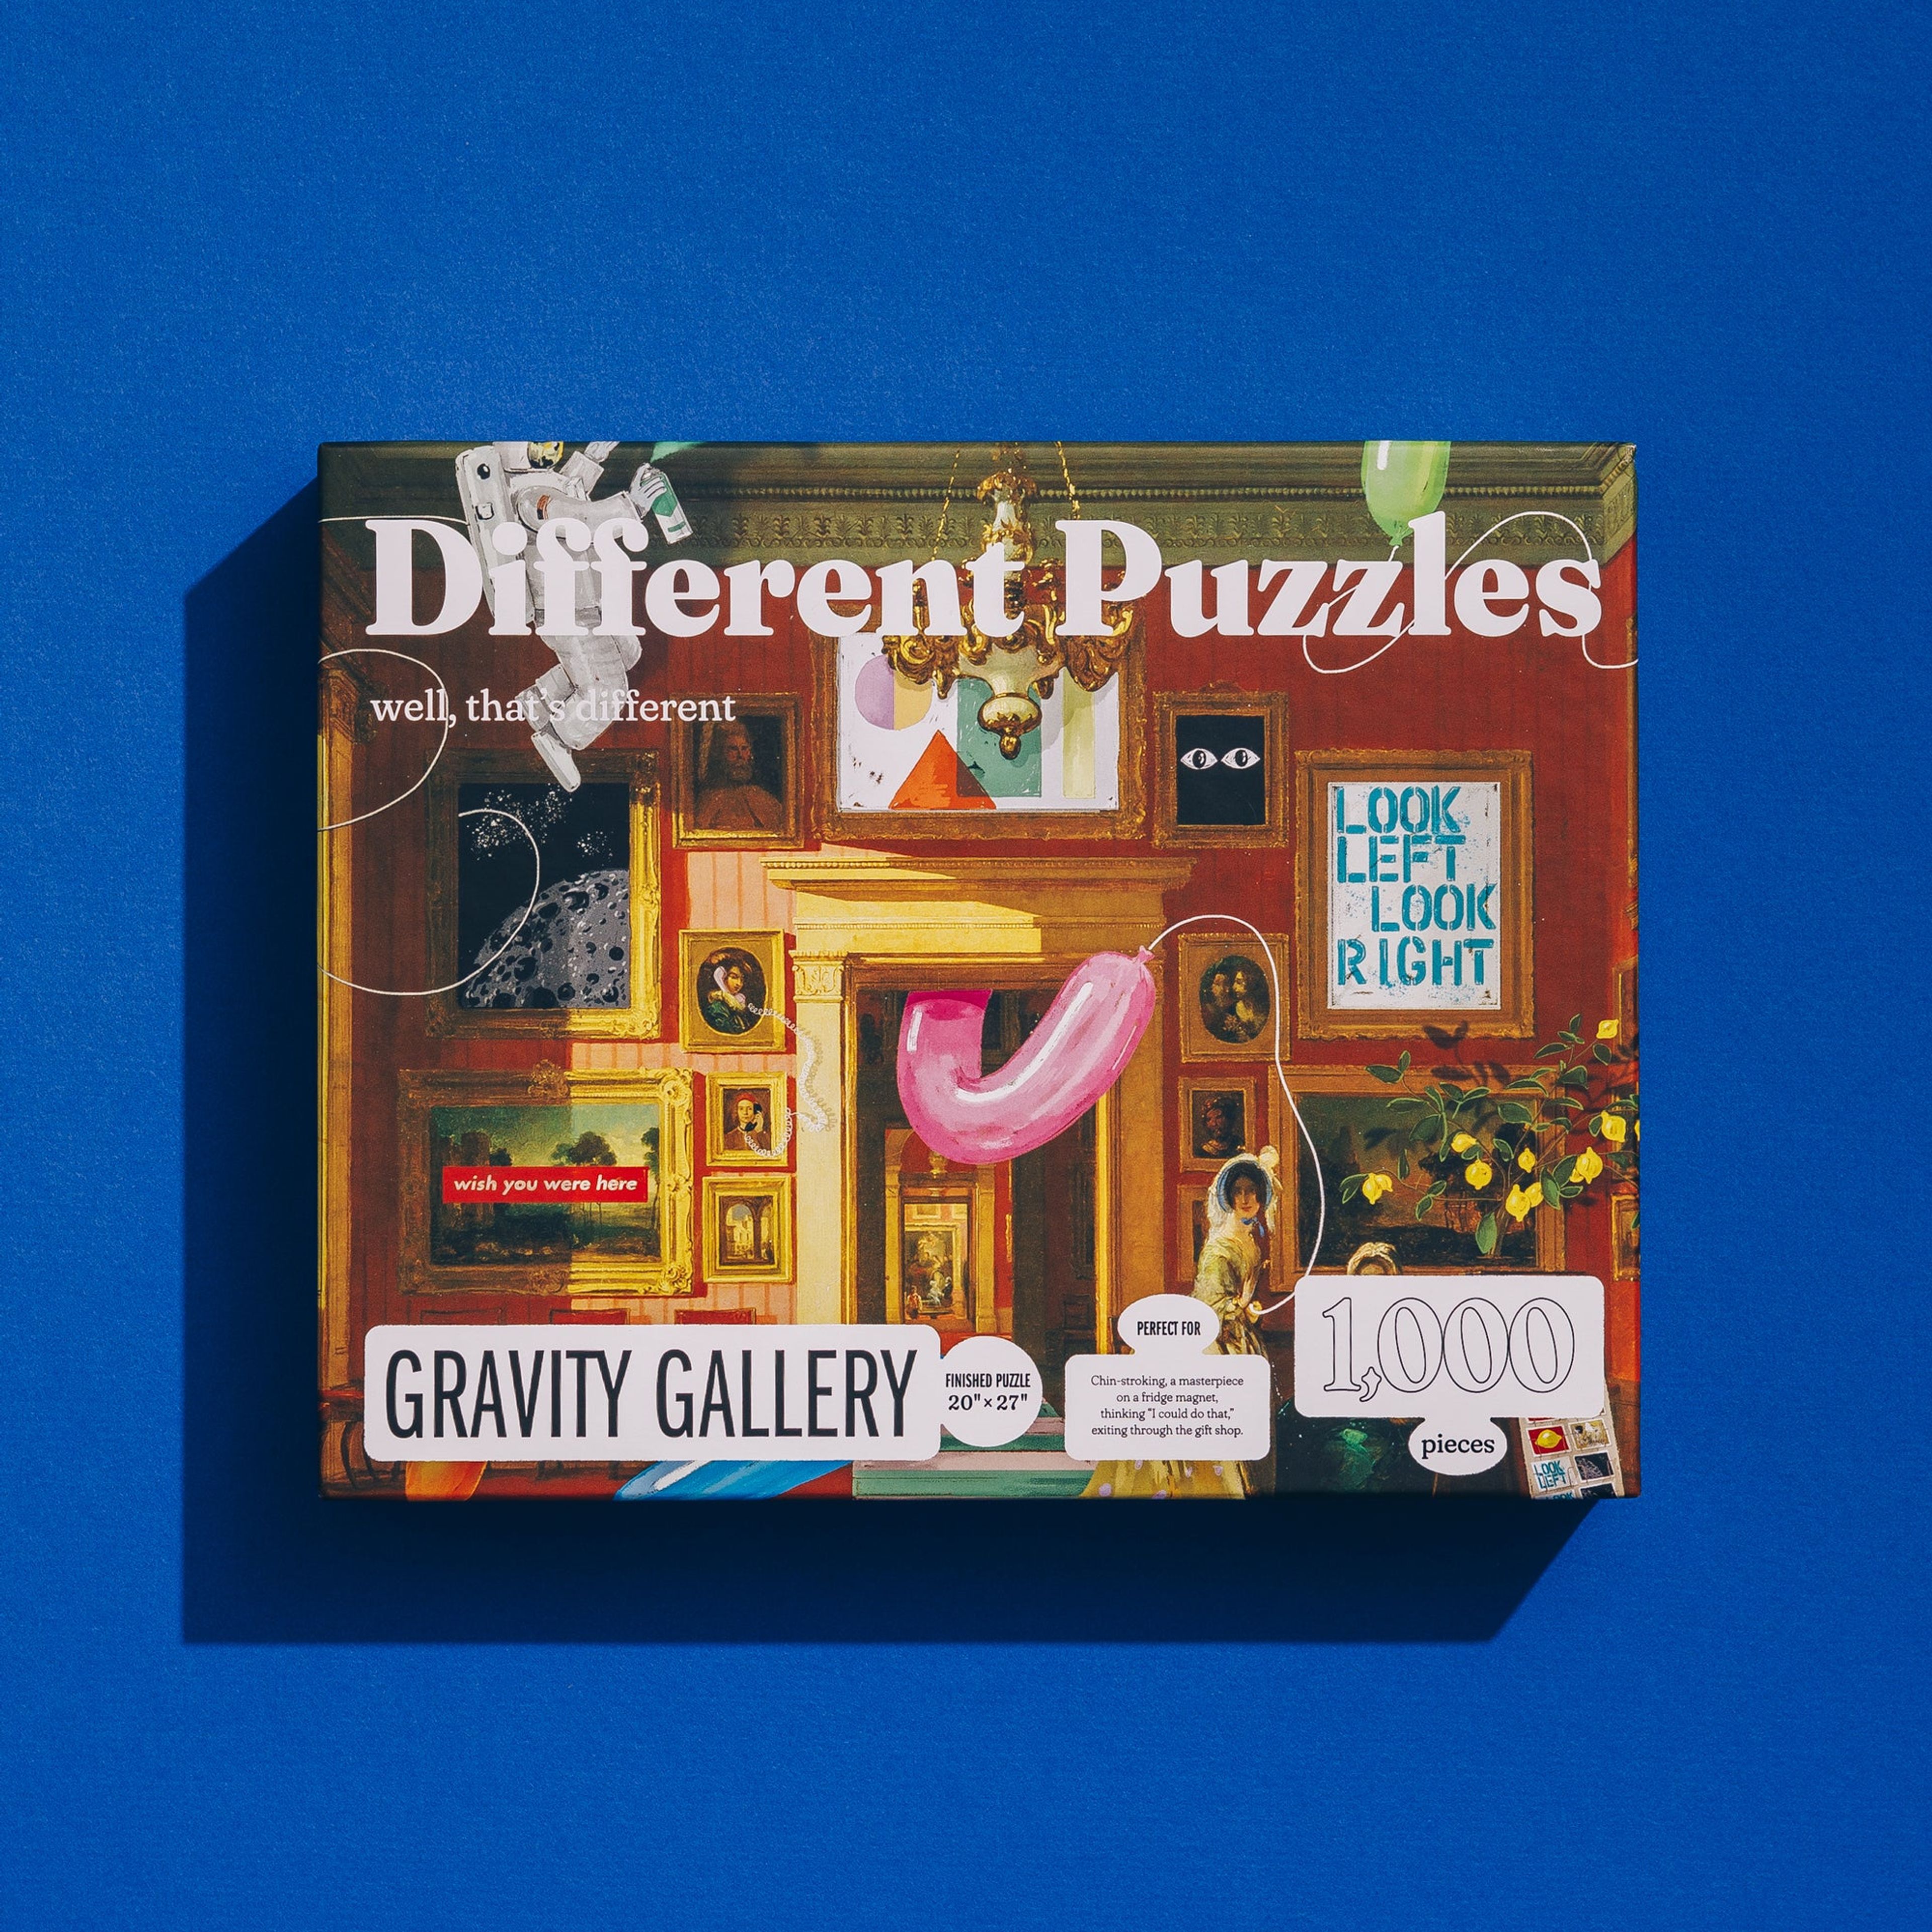 Gravity Gallery – 1,000 pieces